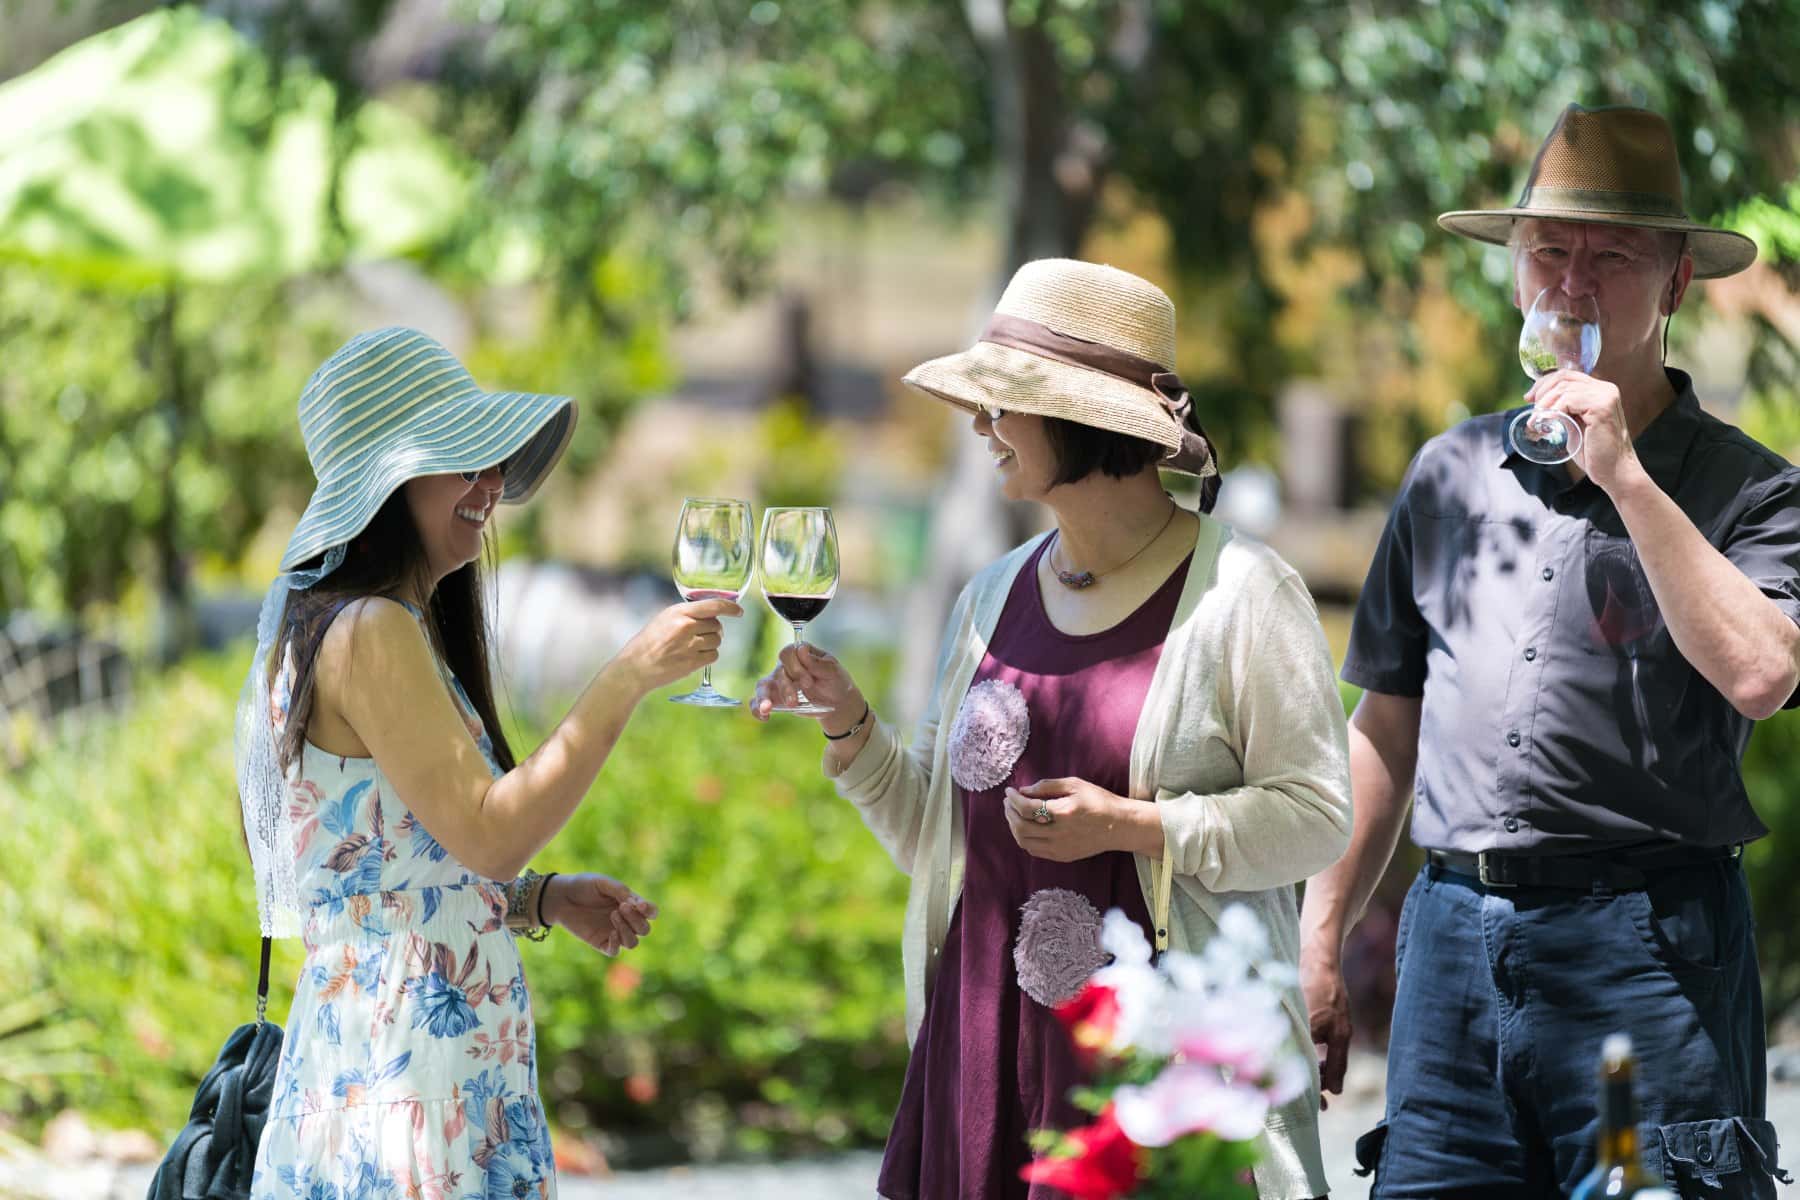 Three club members in summer garden party attire and sun hats sampling award winning Rodrigue Molyneaux red wines